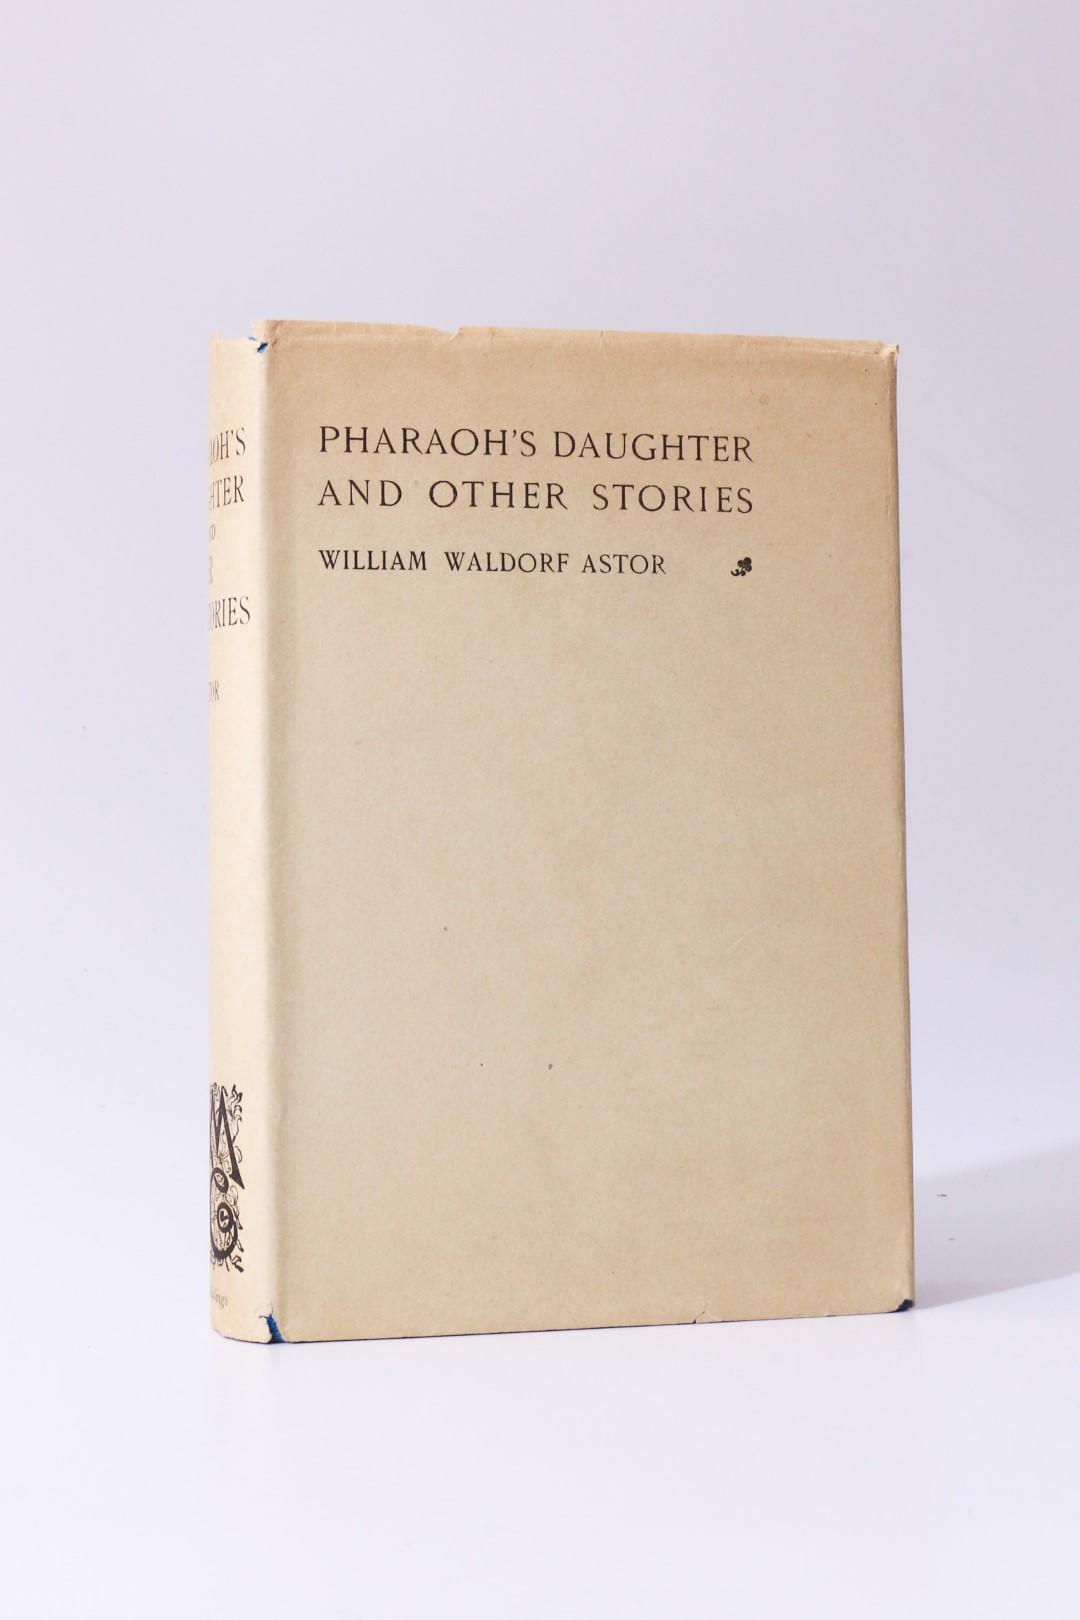 William Waldorf Astor - Pharoah's Daughter and Other Stories - Macmillan, 1900, First Edition.